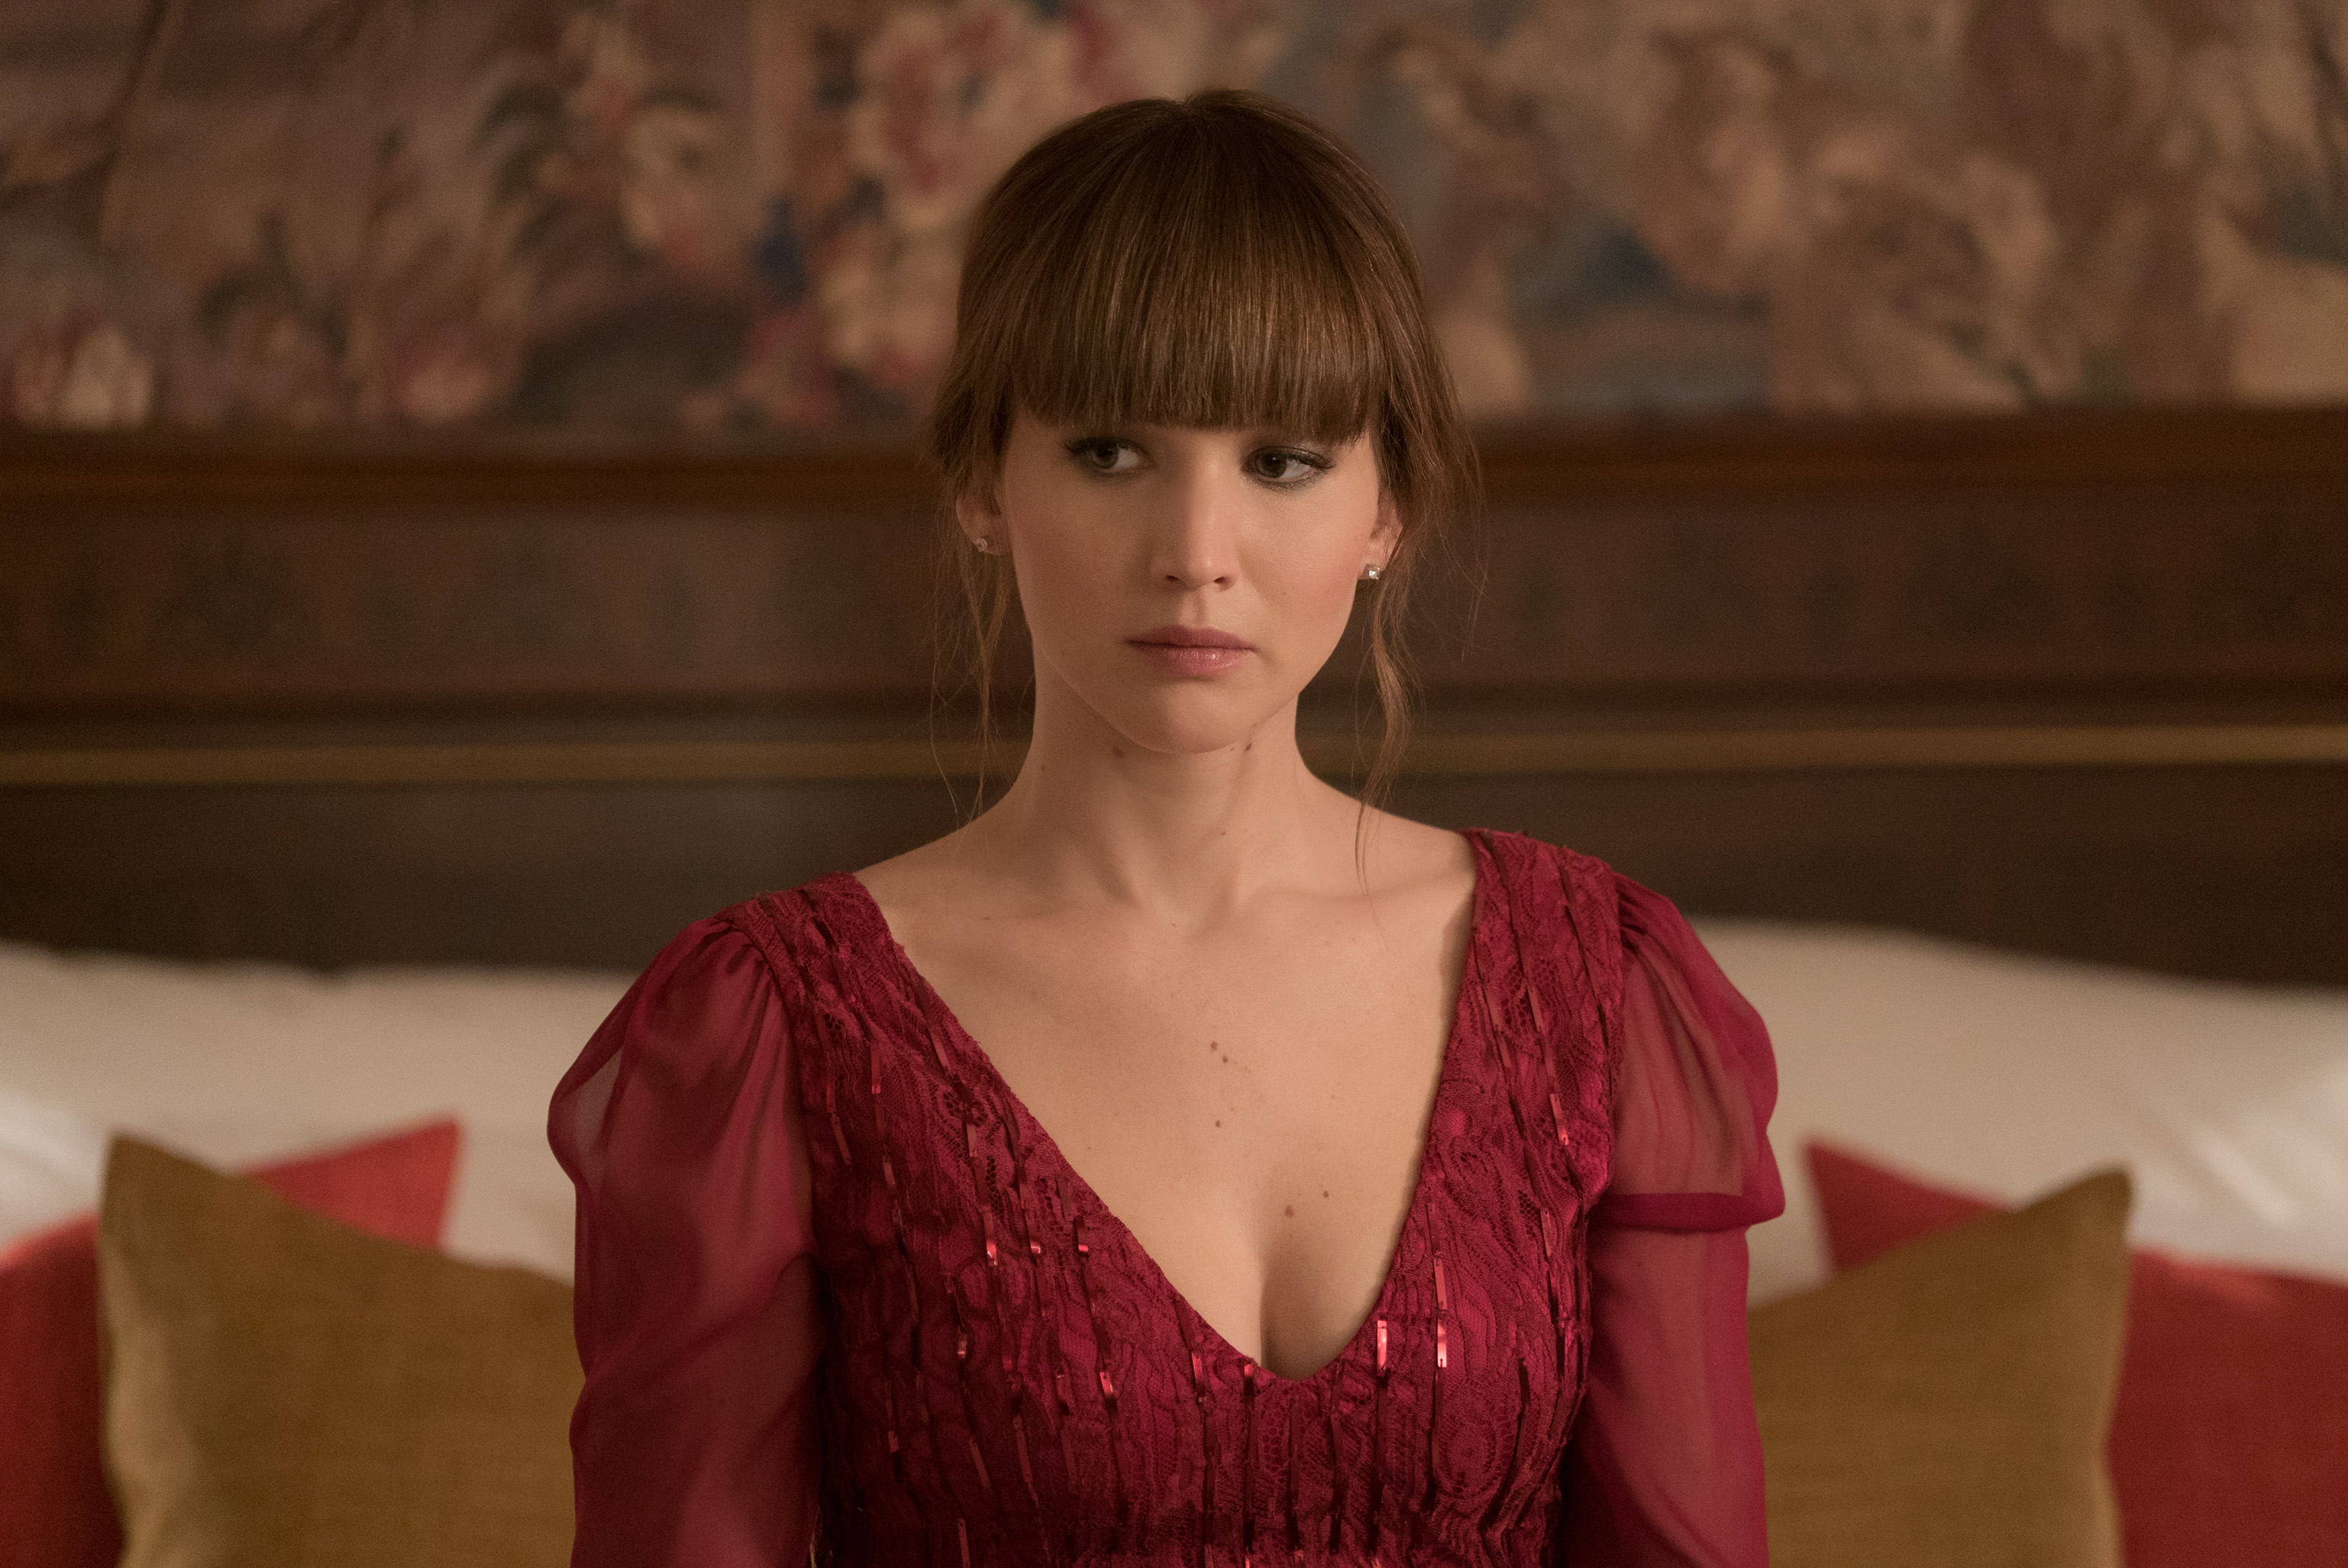 Jennifer Lawrence wearing red in RED SPARROW.